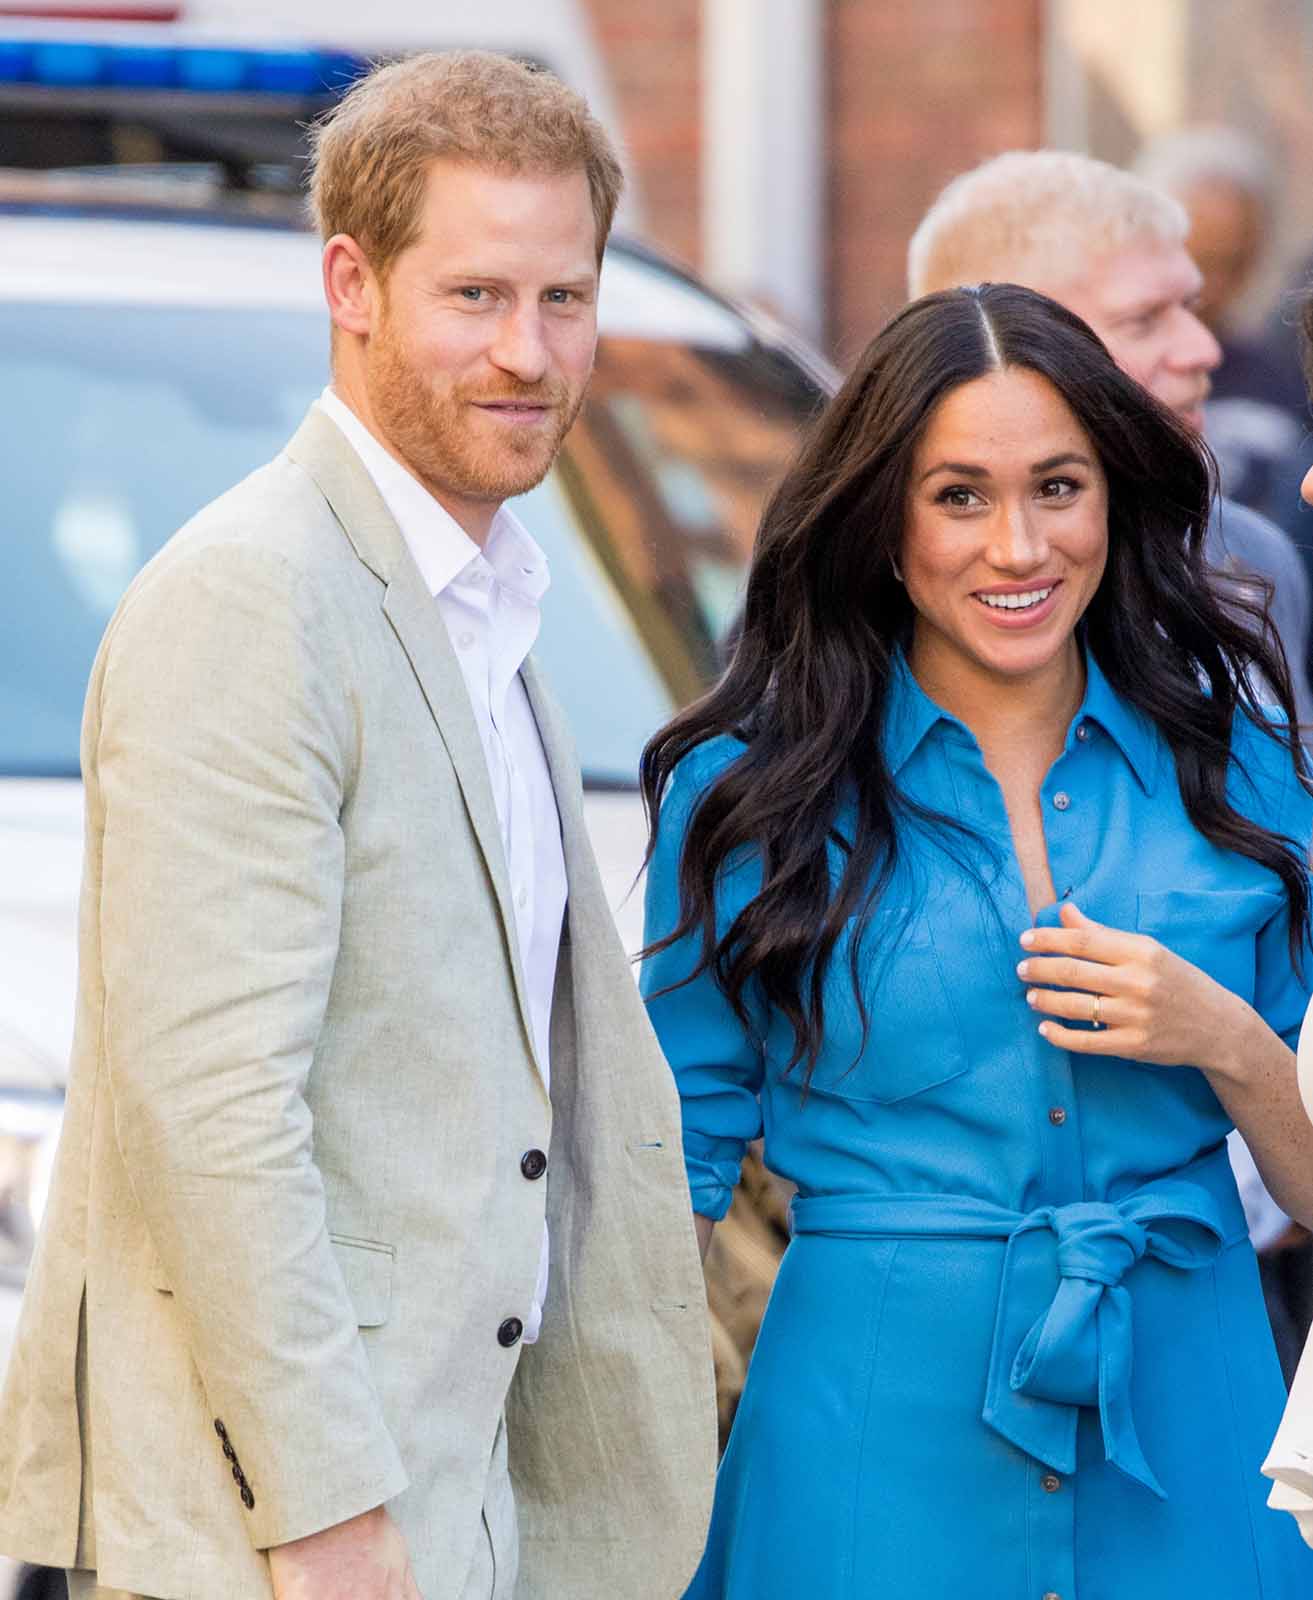 Prince Harry and Meghan Markle has made history with their Netflix deal, but will the Queen let them keep going forward with it?